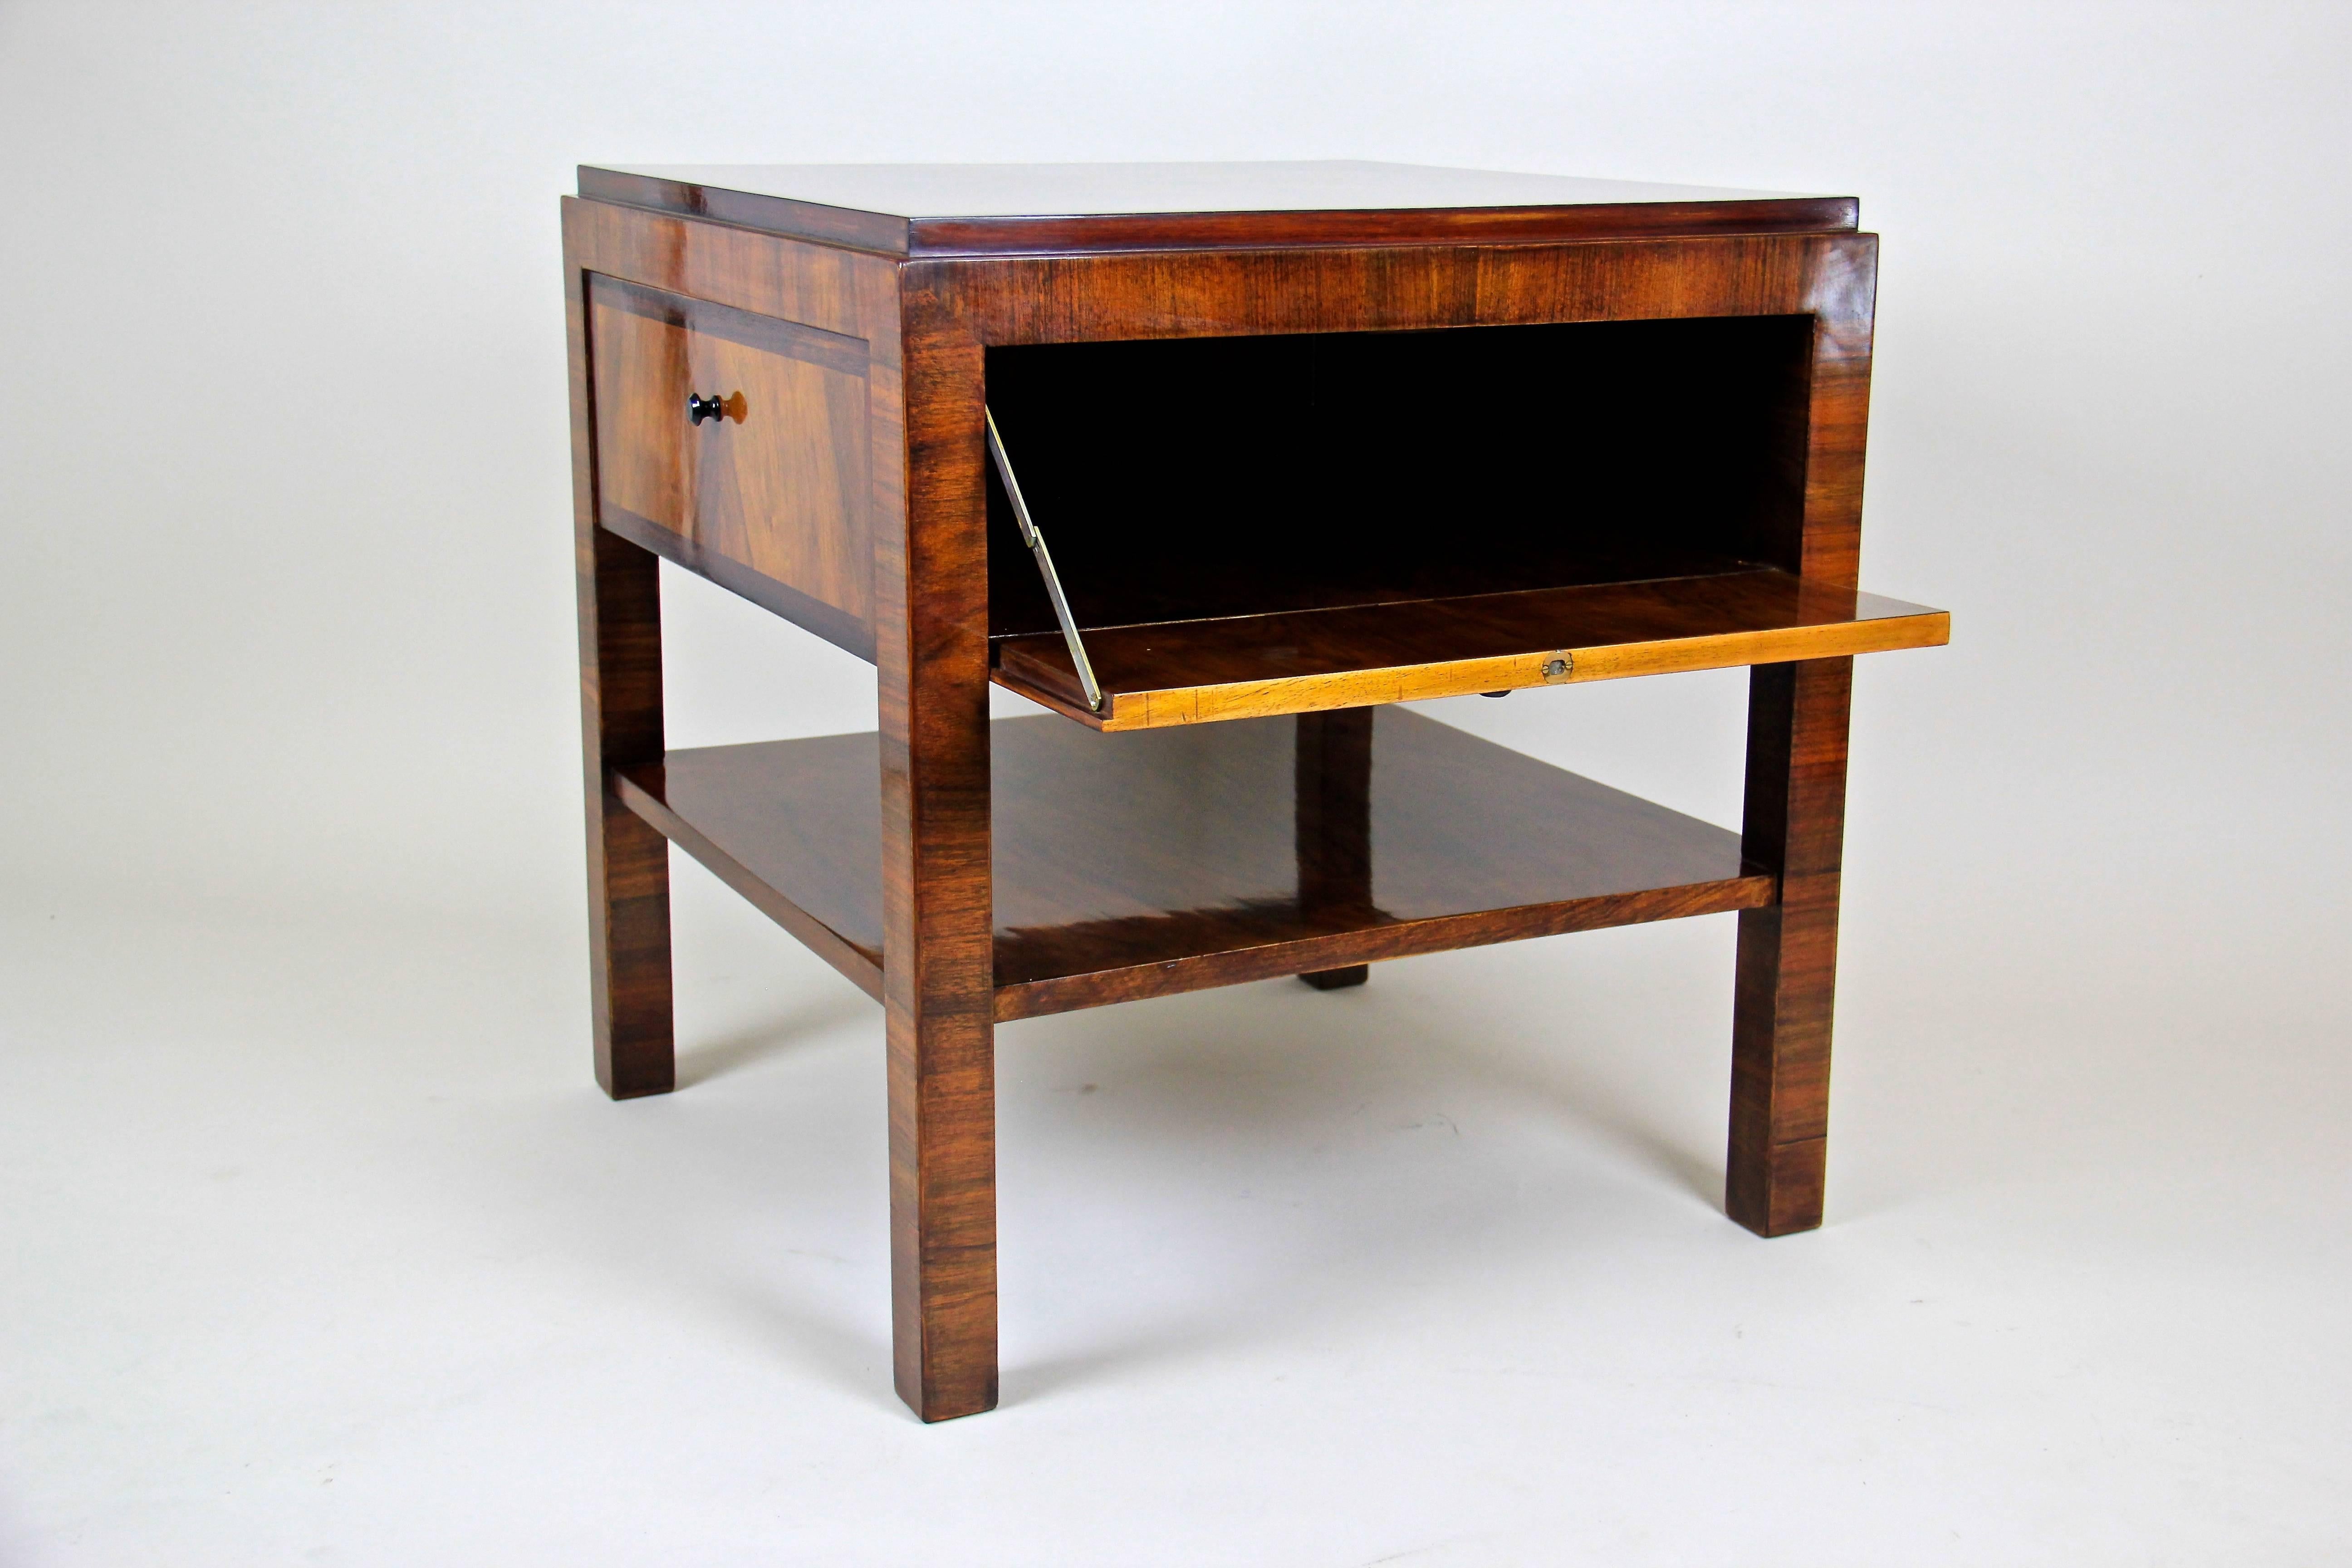 Nutwood Art Deco Side Table with Four Doors and Marquetry Tabletop, Austria, circa 1920